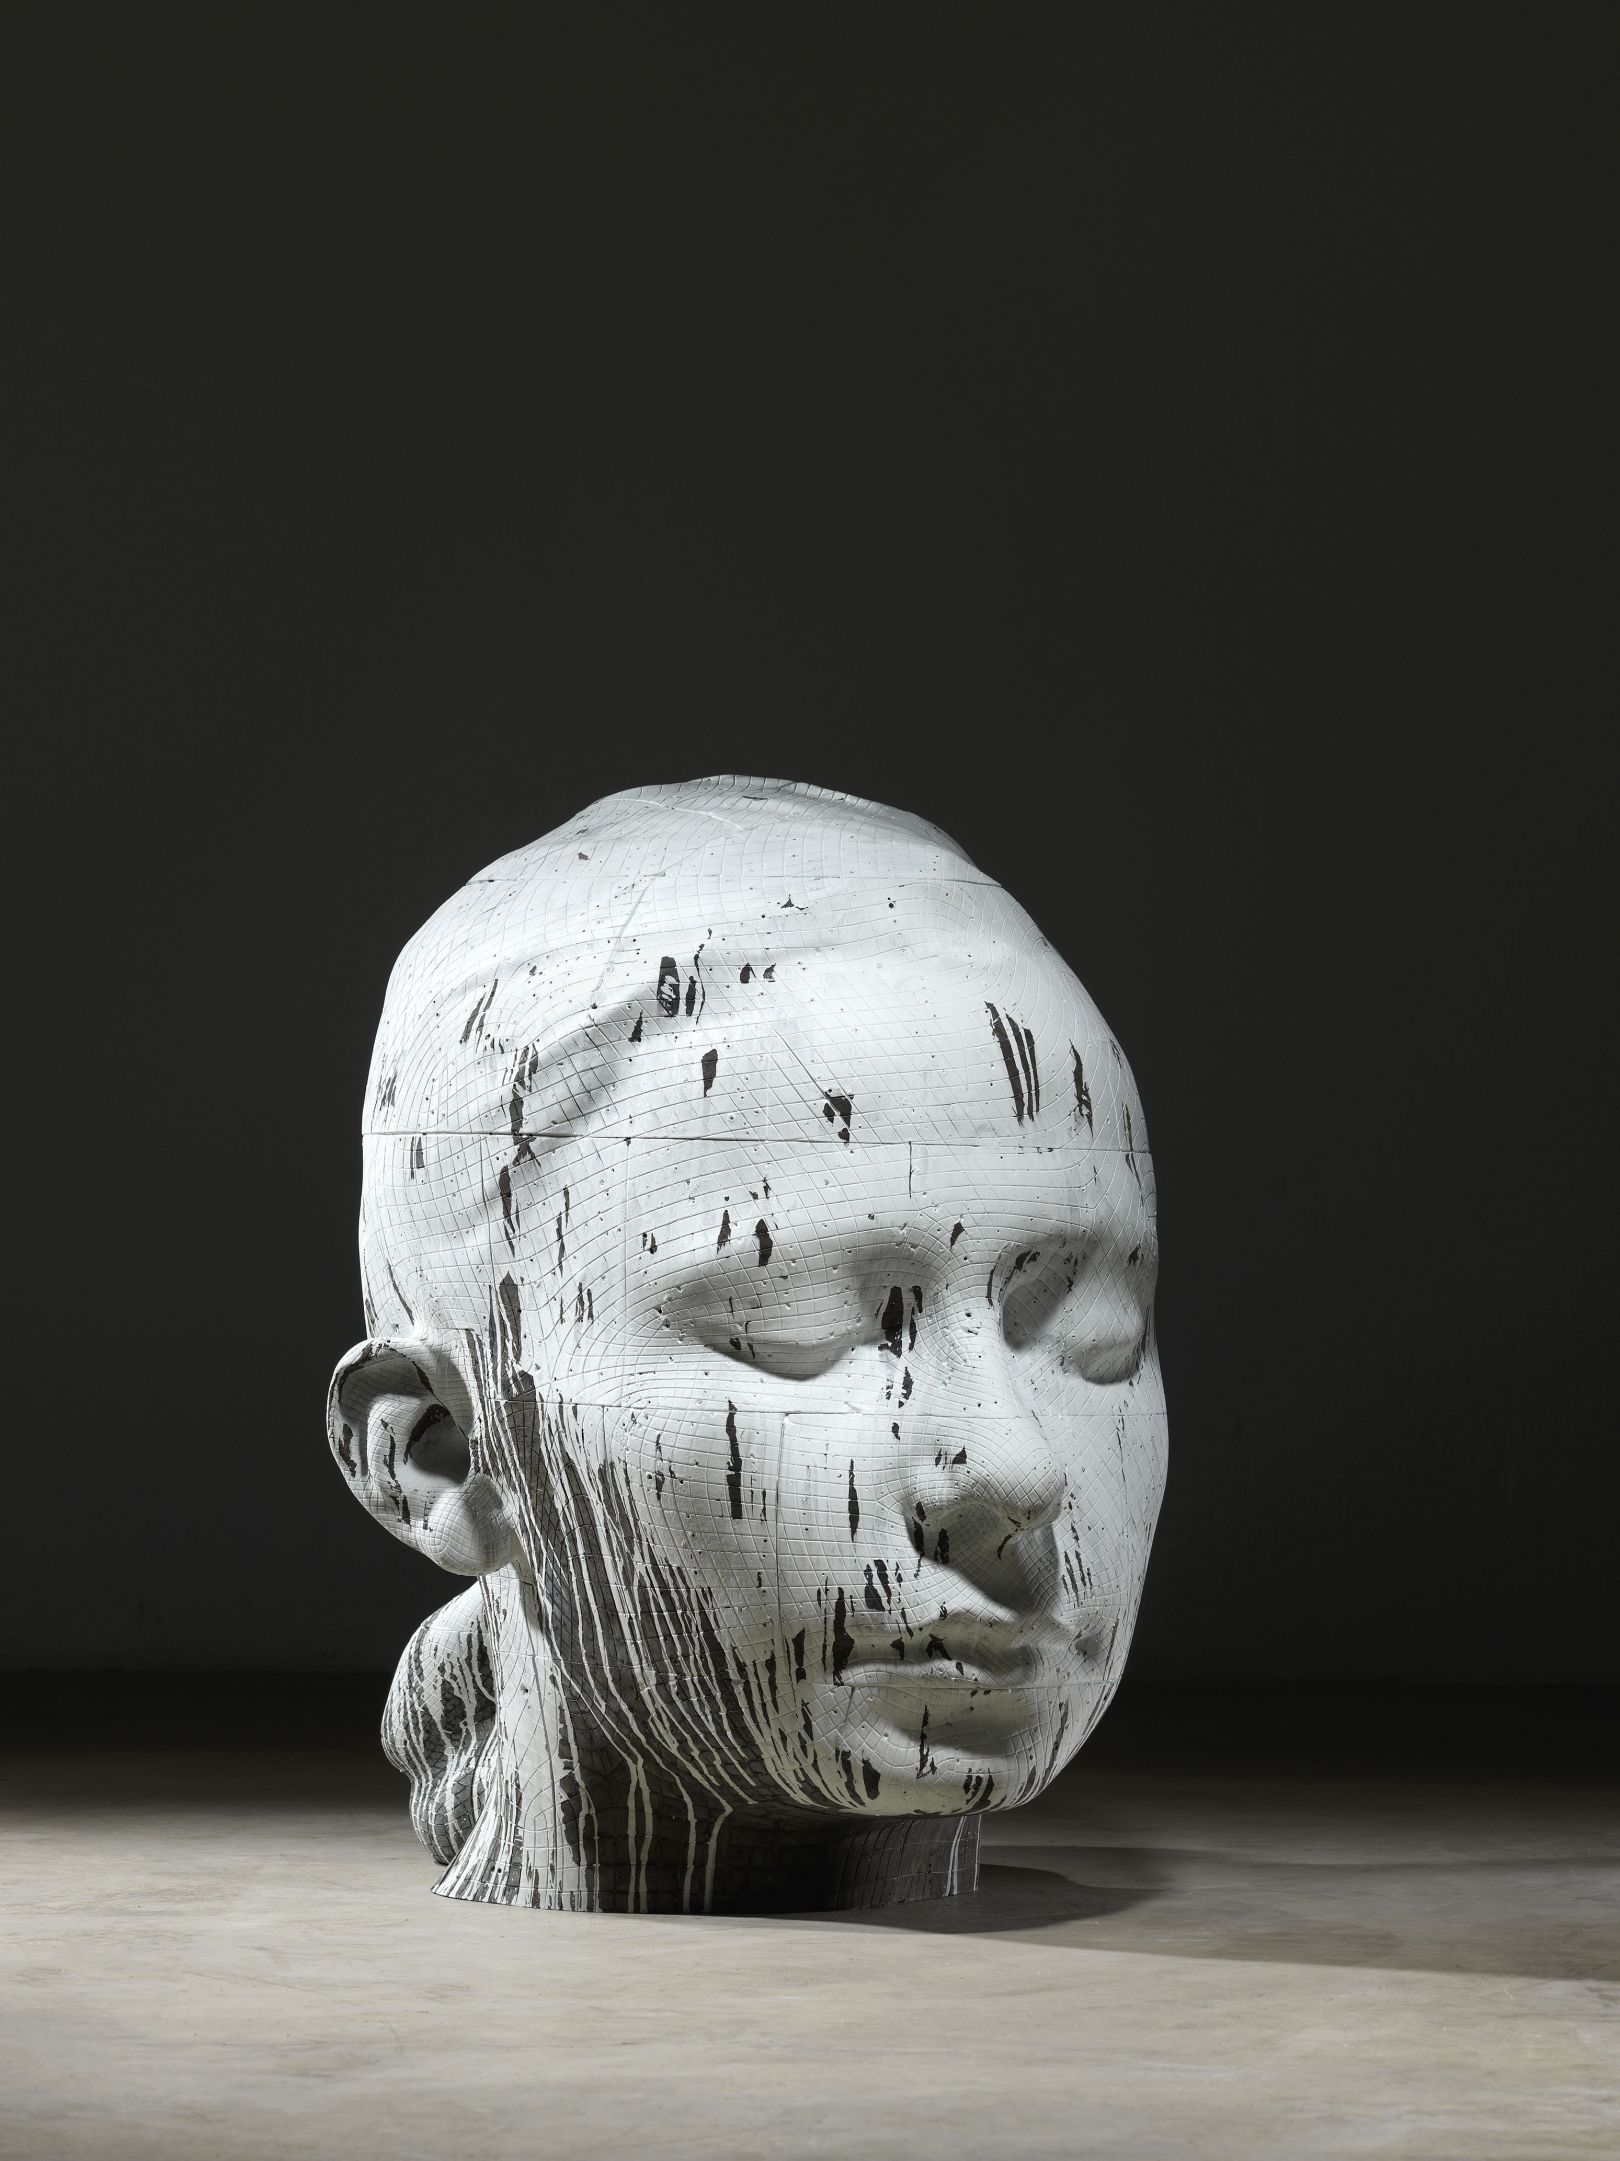 Life-like sculptured heads by Jaume Plensa explore the contrast of ...